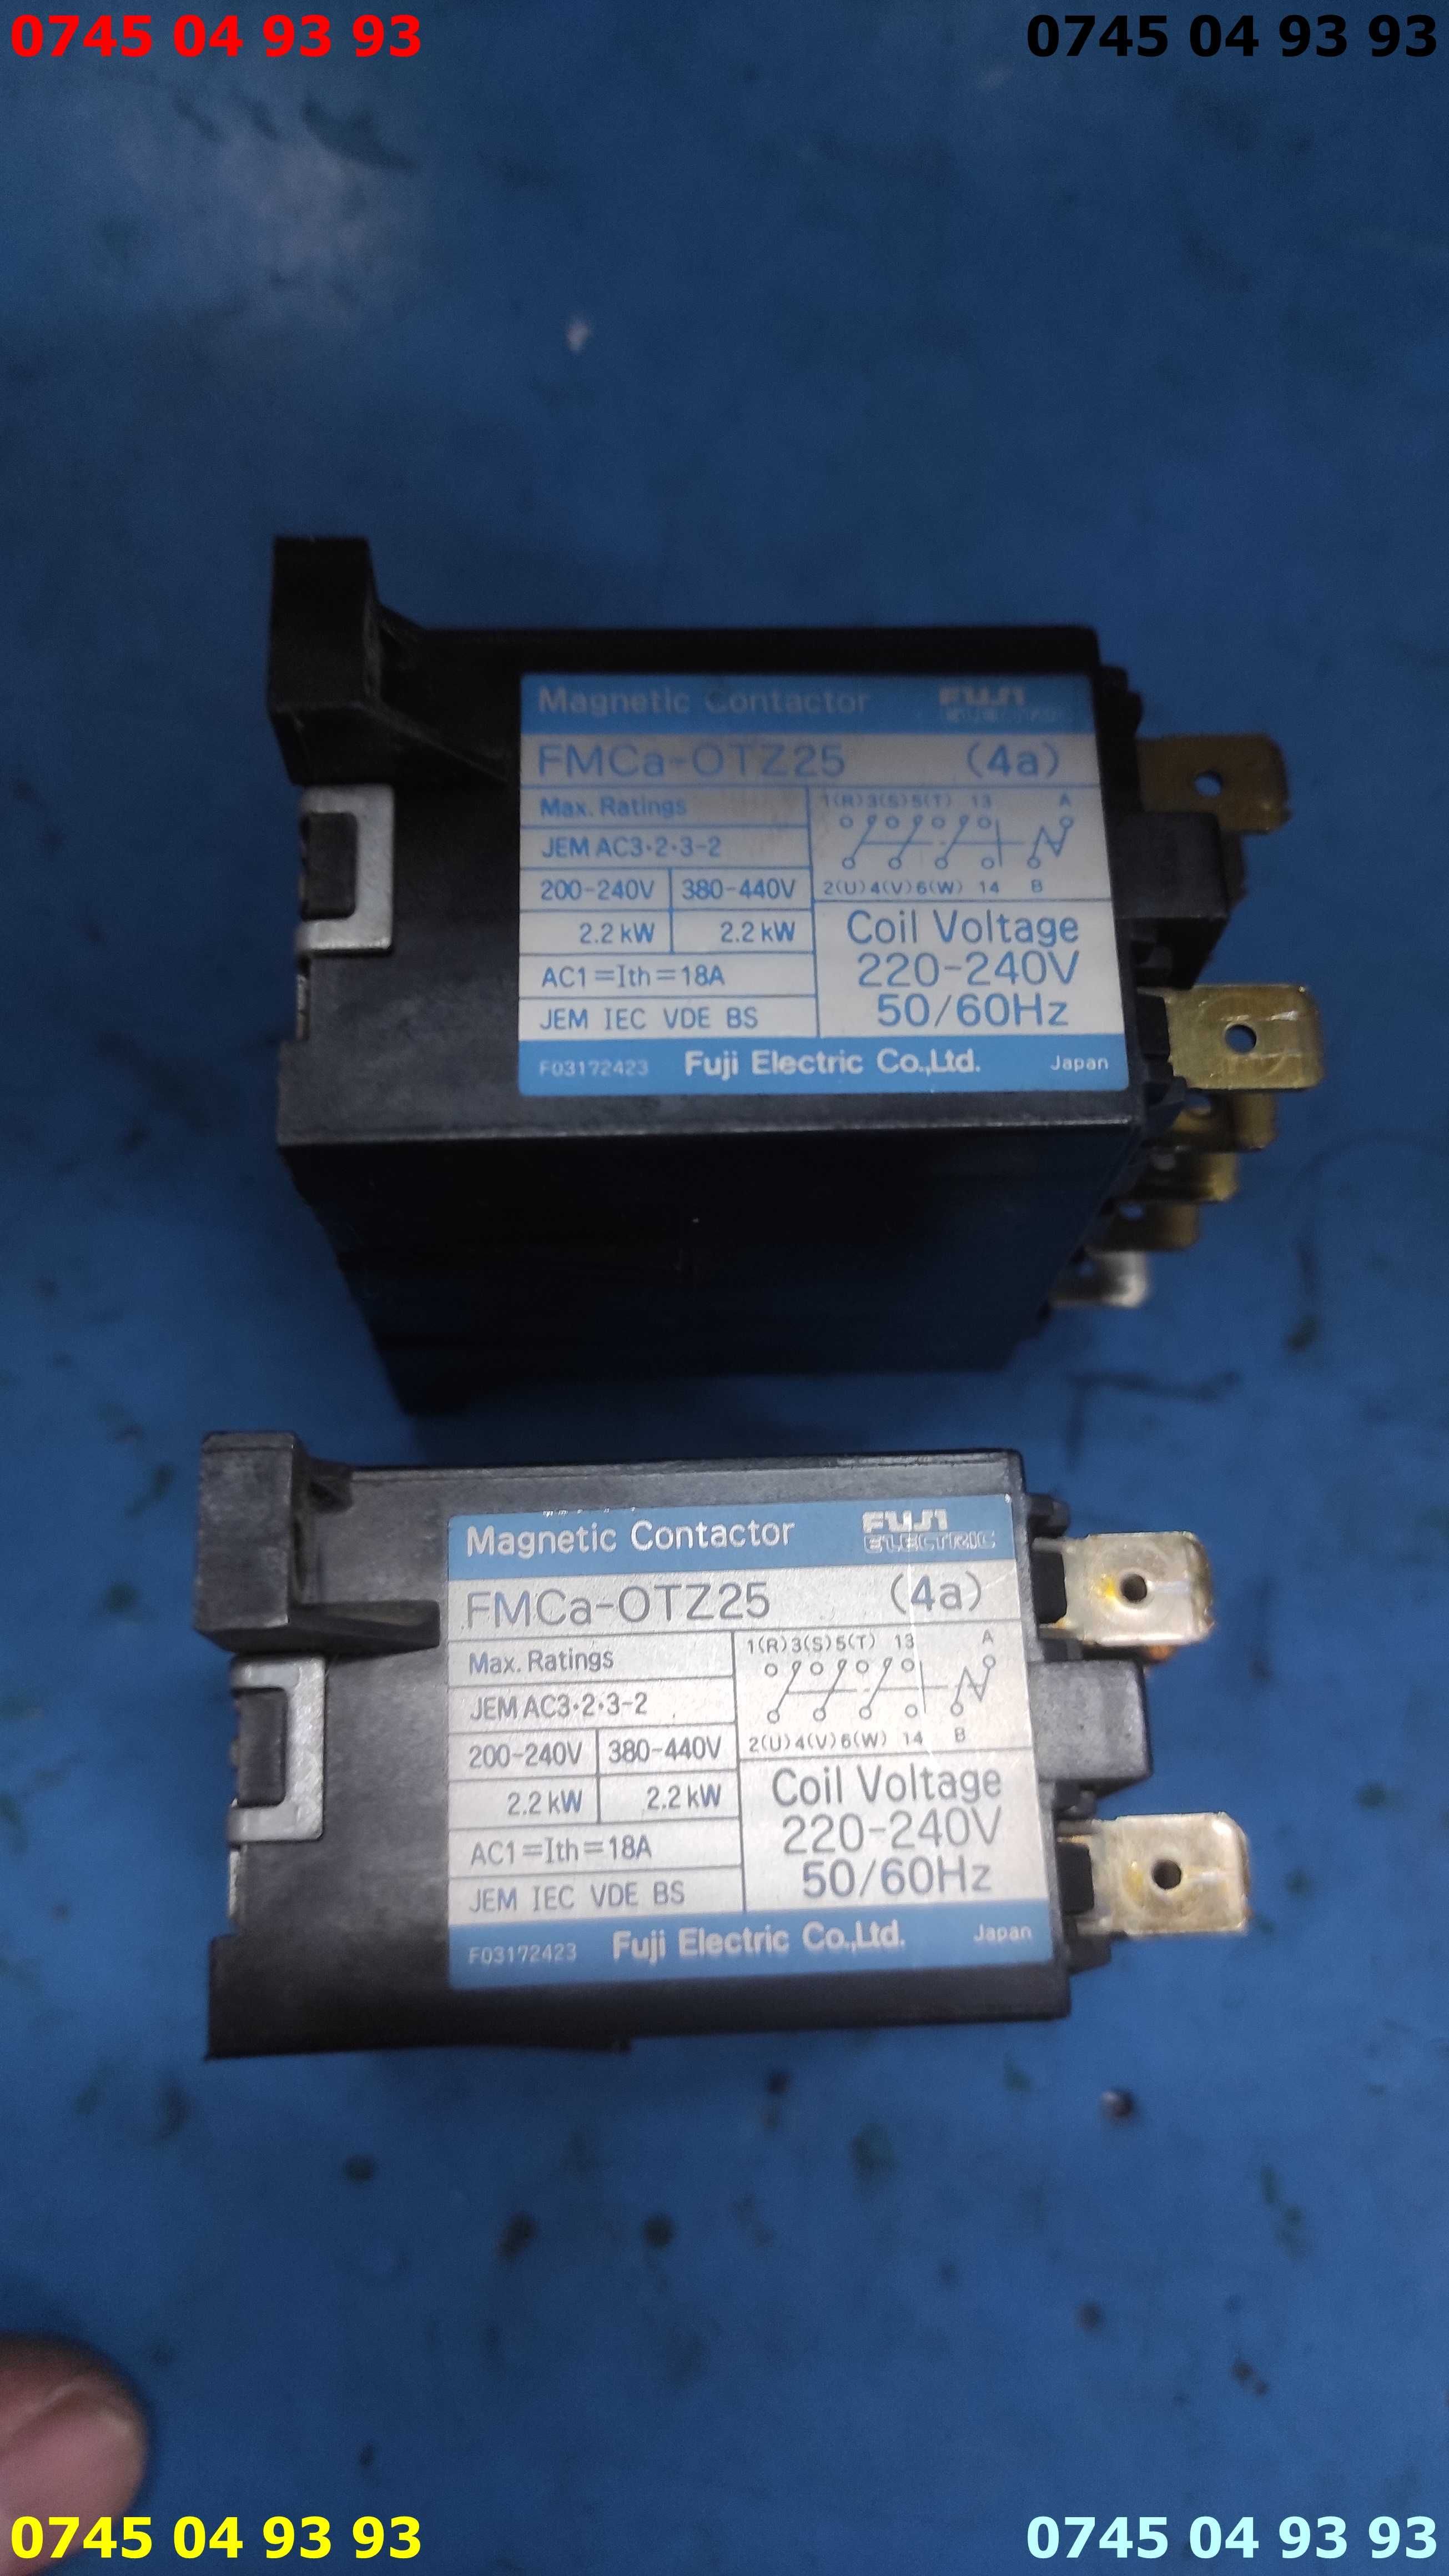 contactor magnetic aer conditionat 2.2kw fuji electric